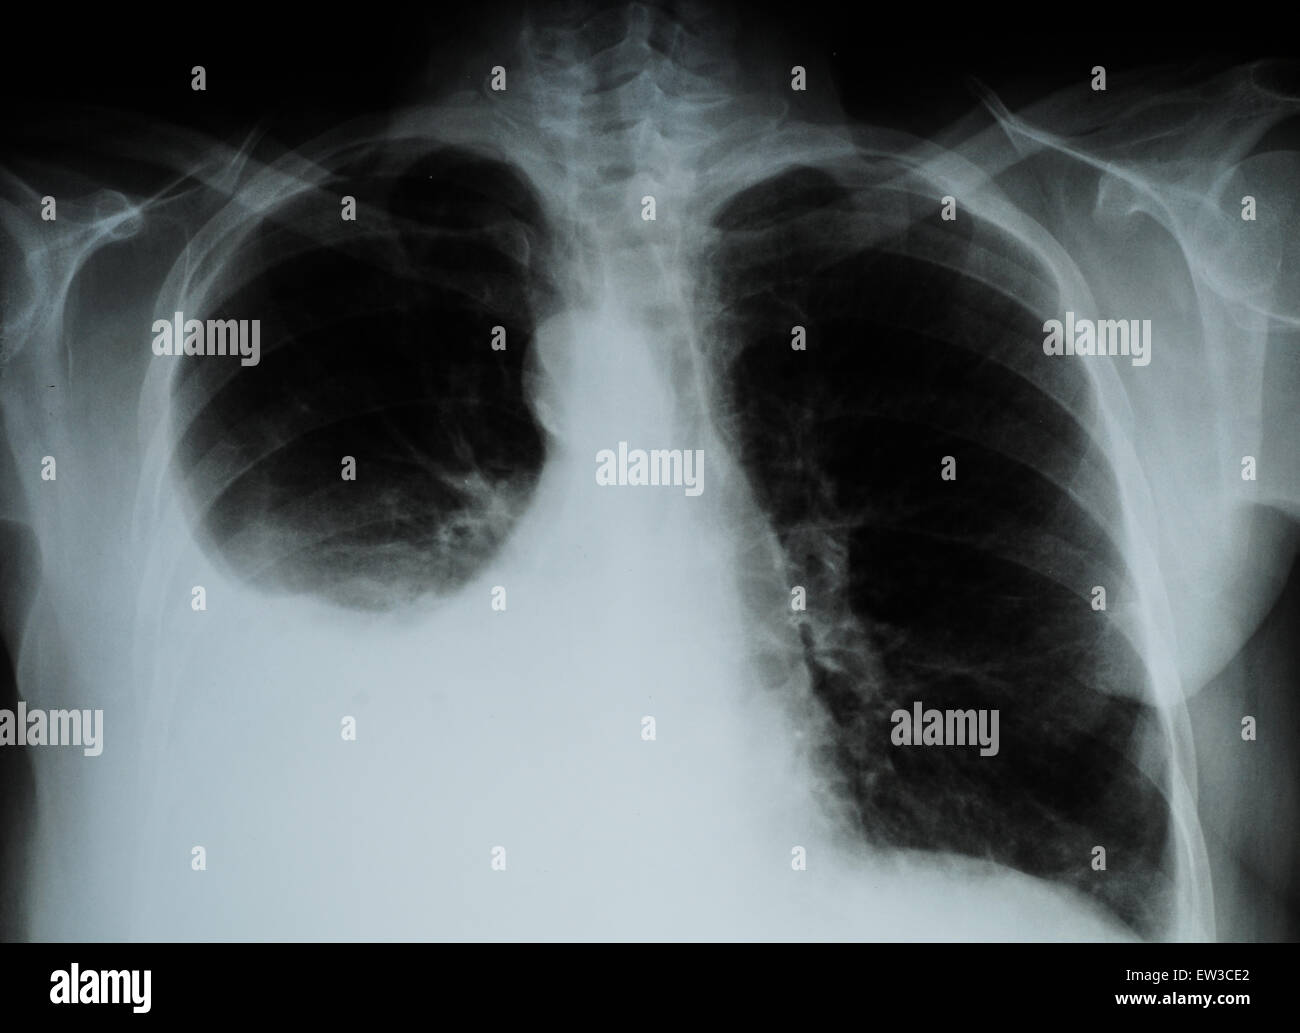 X-Ray Image Of Human Chest for a medical exam by the Doctors Stock Photo